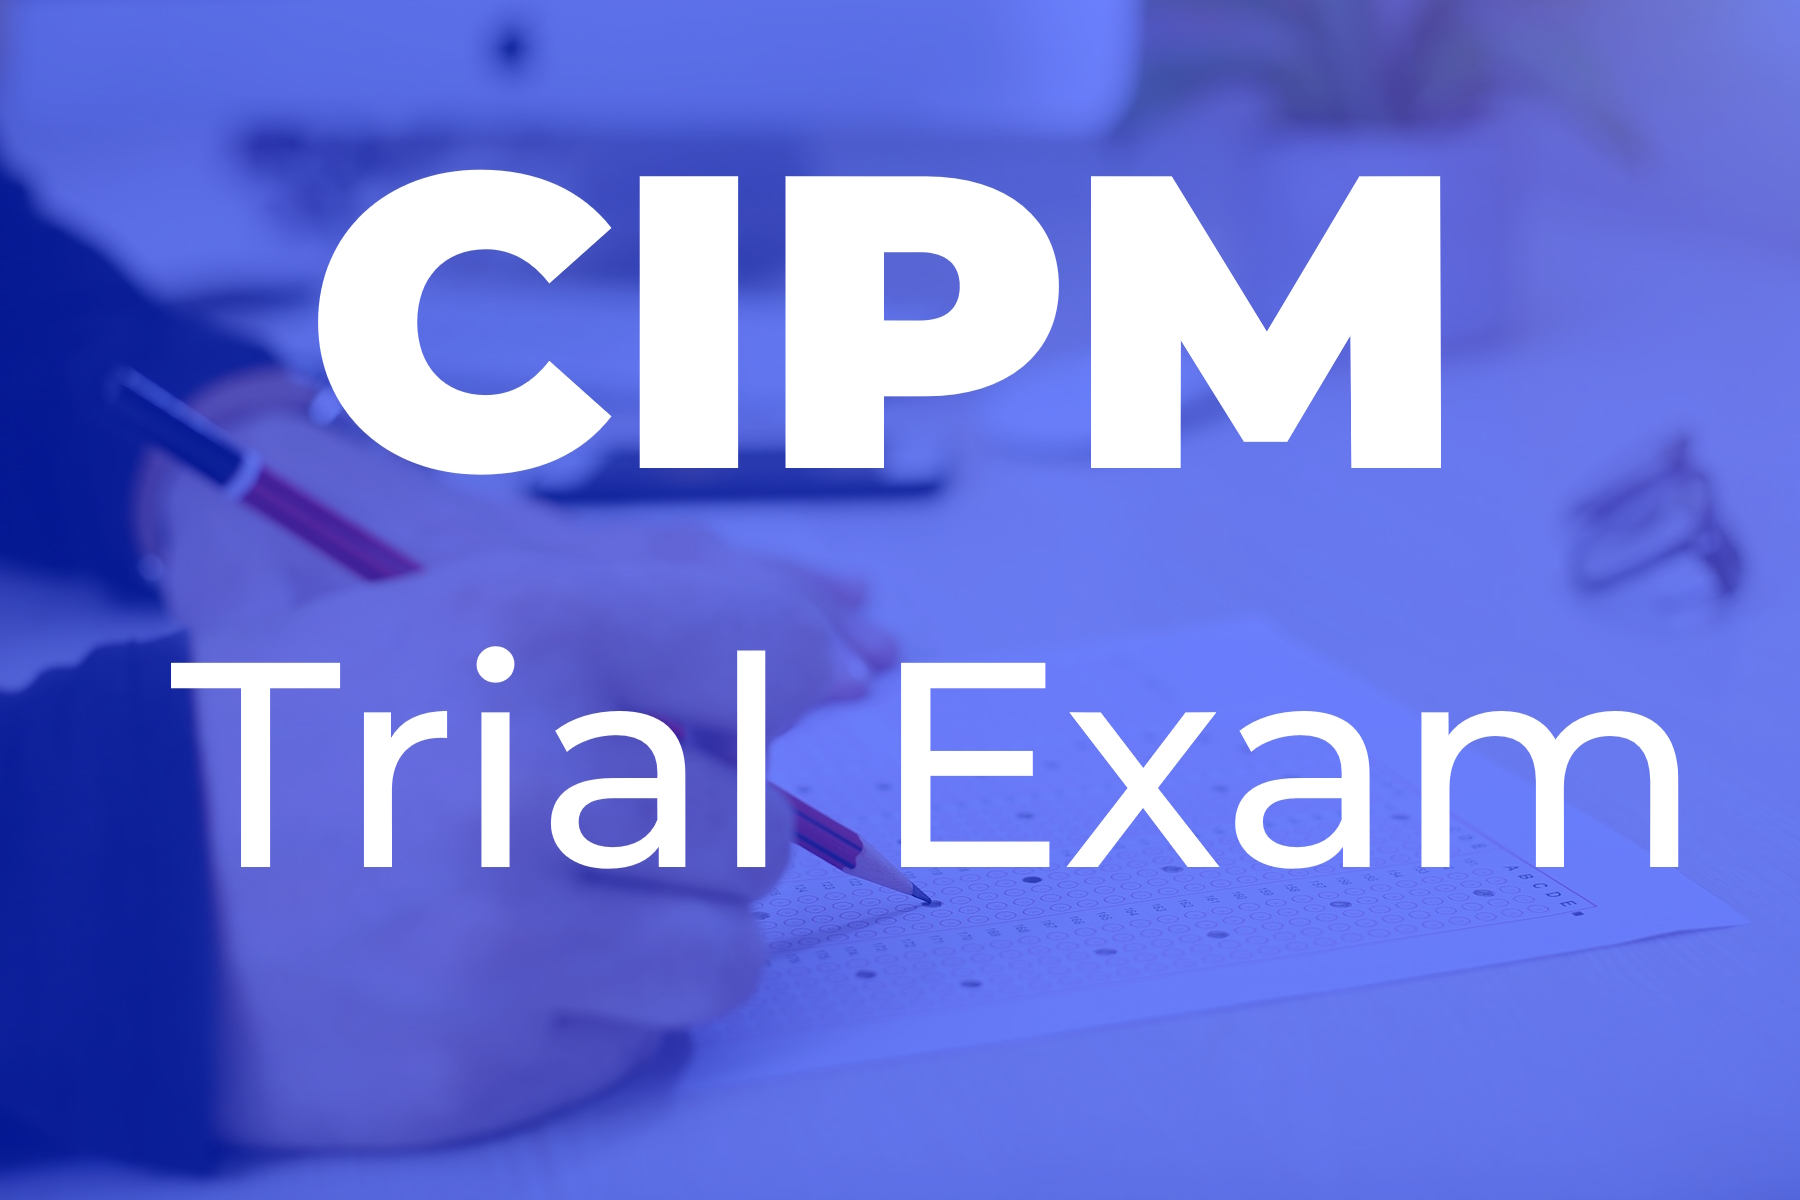 CIPM Practice Exam - Our Latest Addition